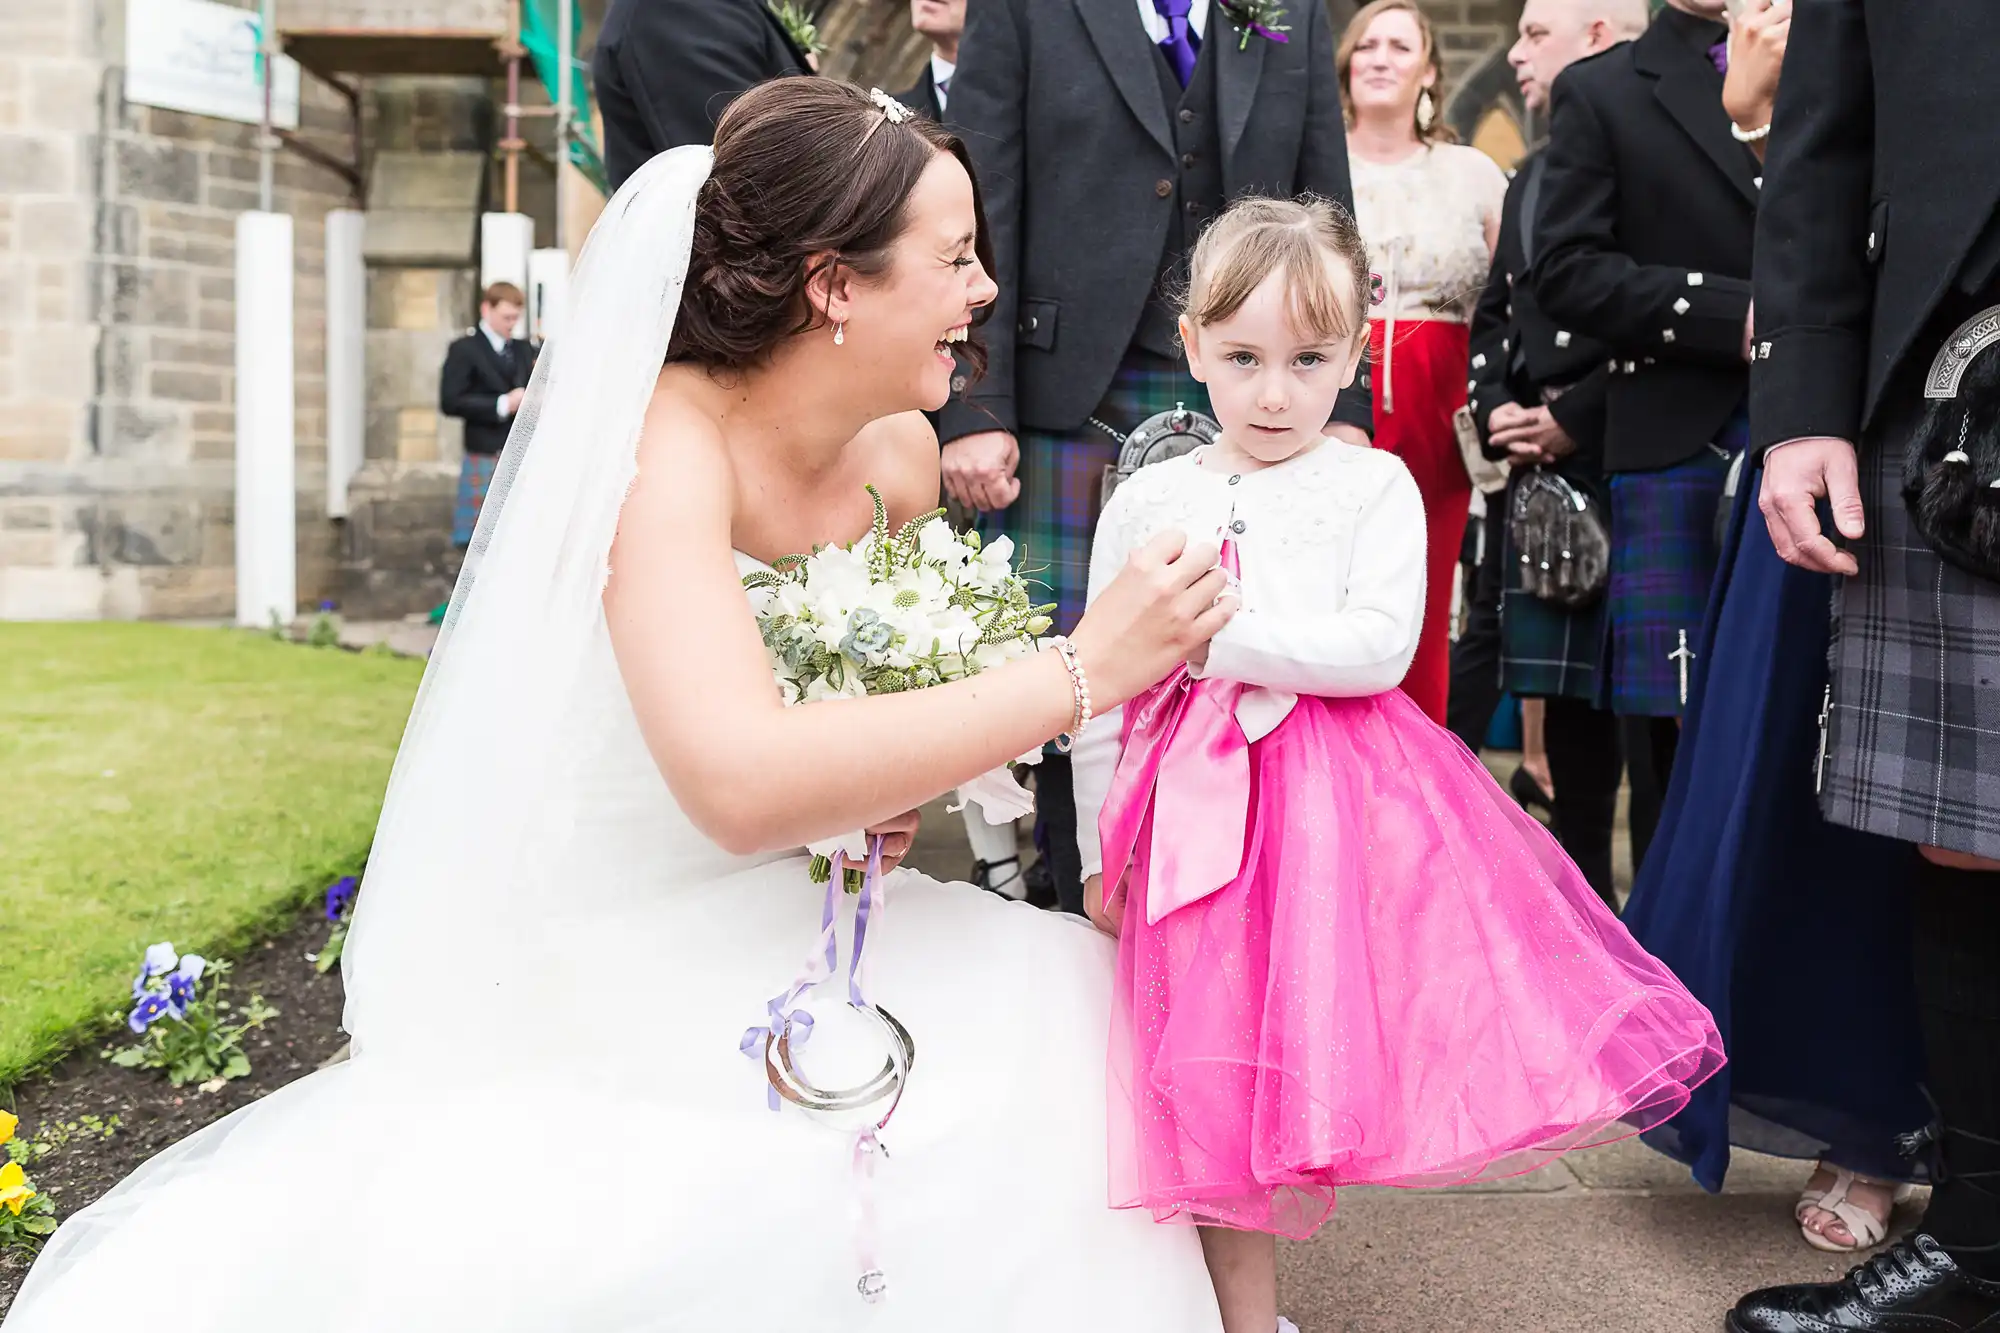 Bride in white dress holding bouquet interacting with a young girl in a pink dress outside a church, with guests in the background.